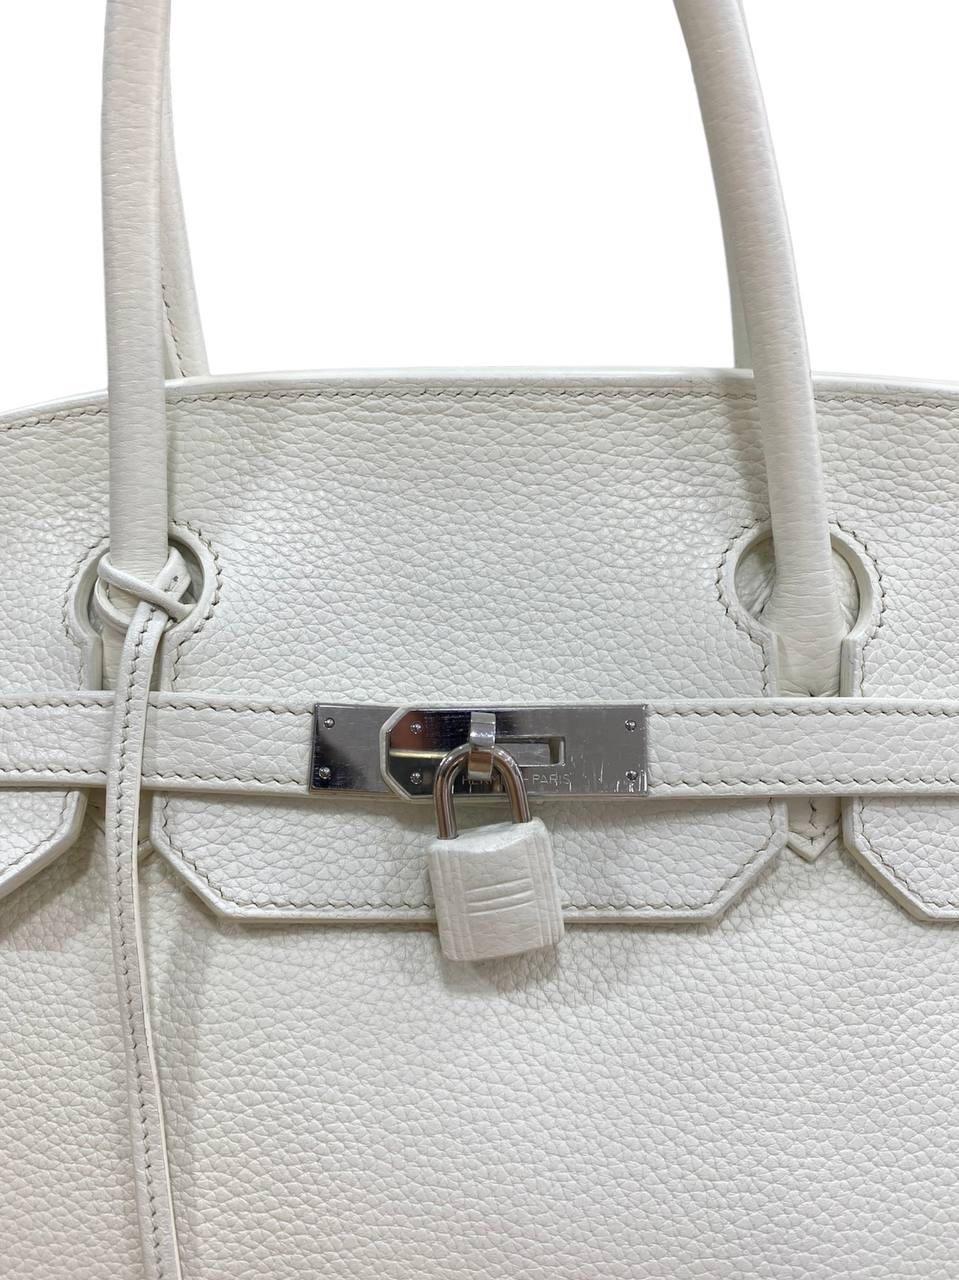 2011 Hermès Birkin 40 White Clemence Leather Top Handle Bag  For Sale 8